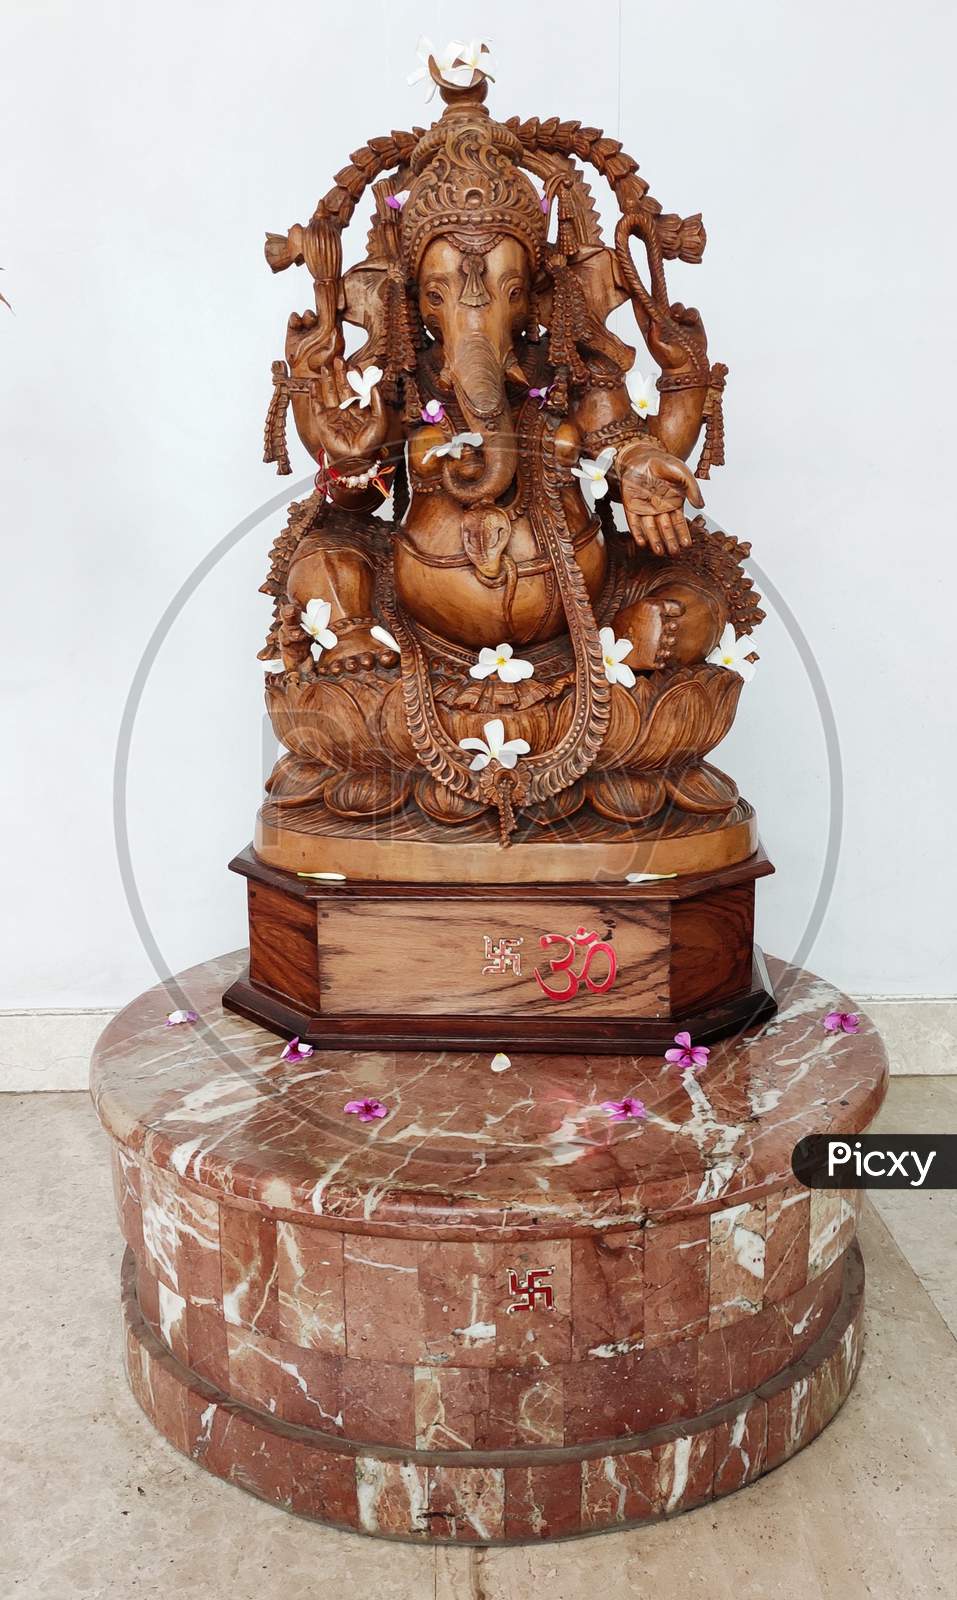 Lord Ganesha carved out of brown stone